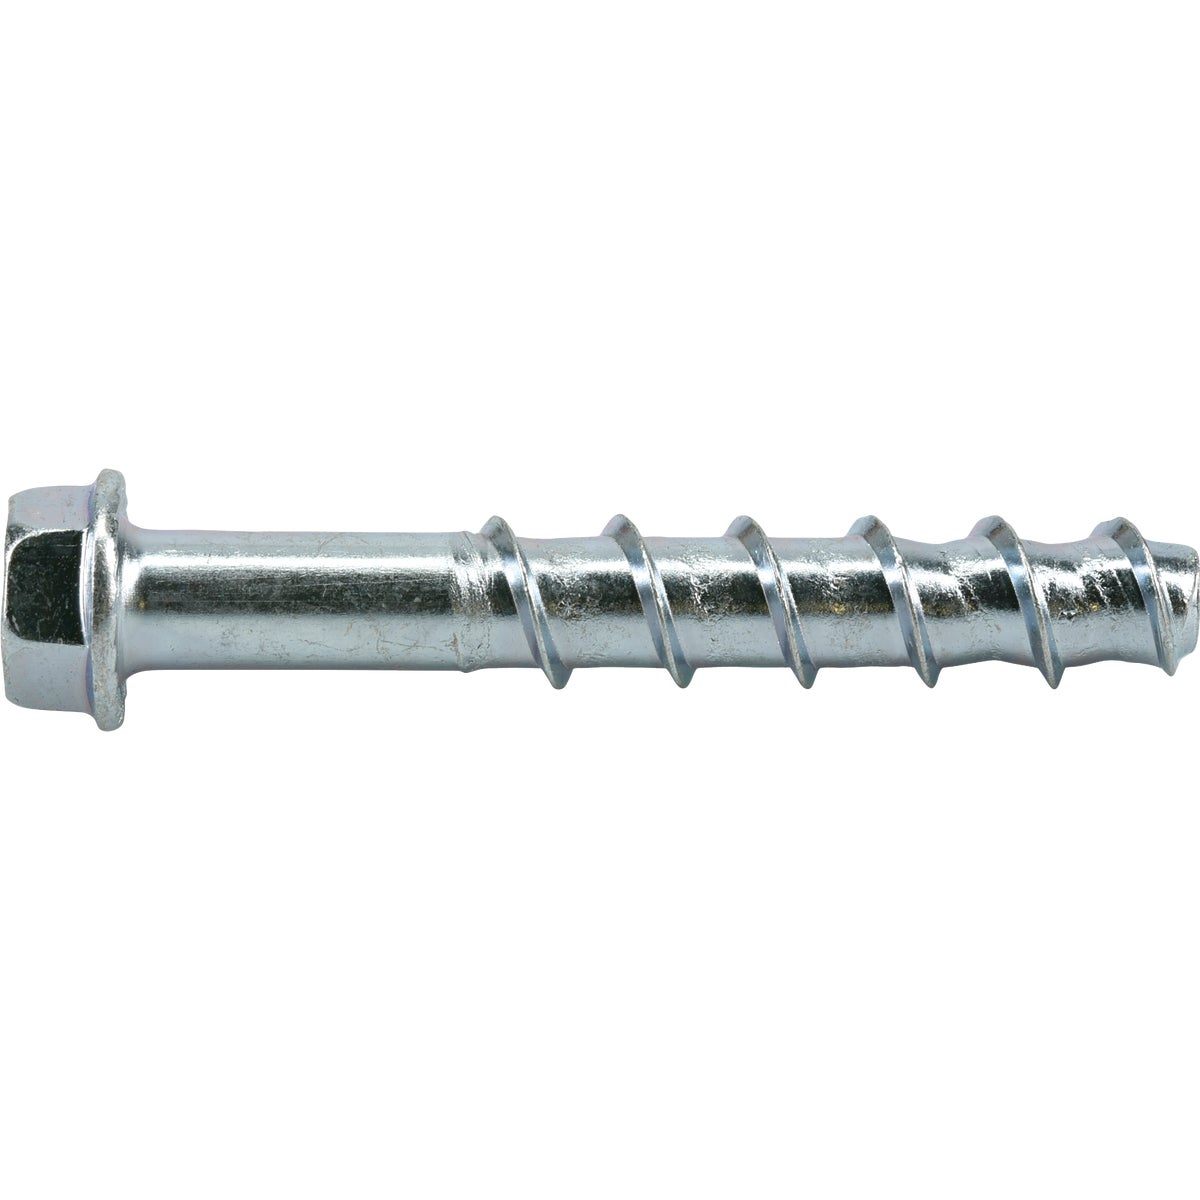 Hillman Screw-Bolt+ 3/8 In. x 3 In. Masonry and Concrete Anchor (15 Count)